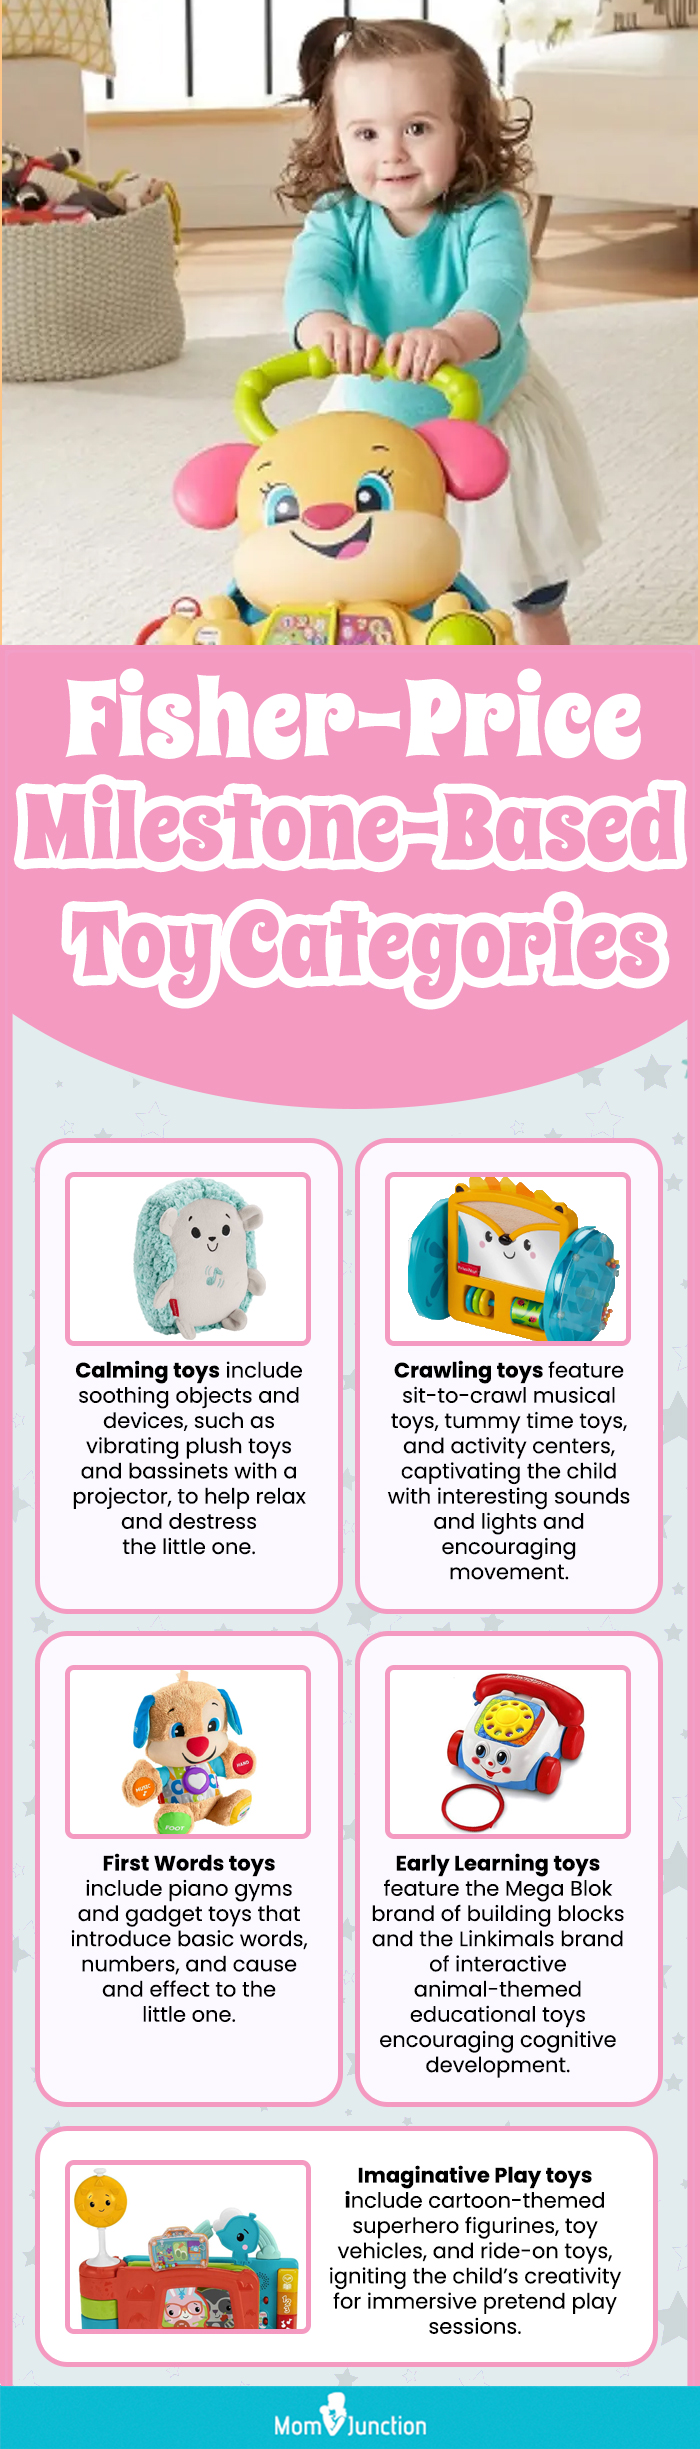 Fisher Price Milestone Based Toy Categories (infographic)